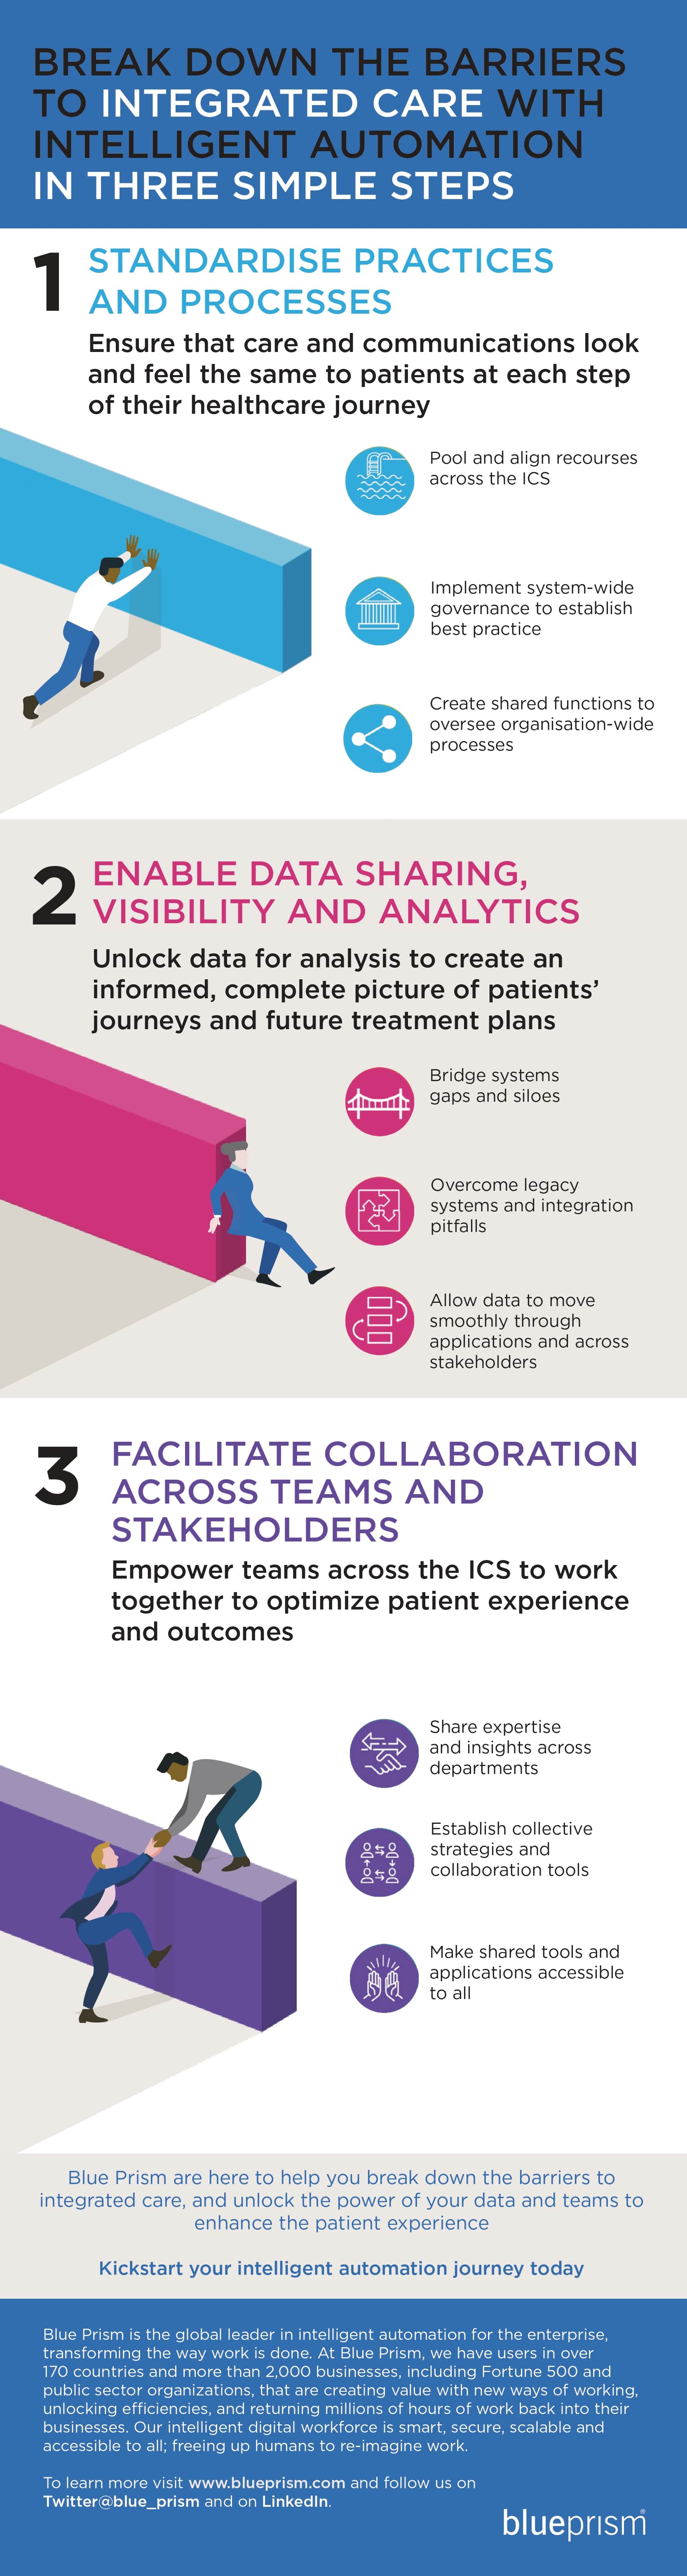 3 Steps to Break Down the Barriers to Integrated Care with Automation Infographic